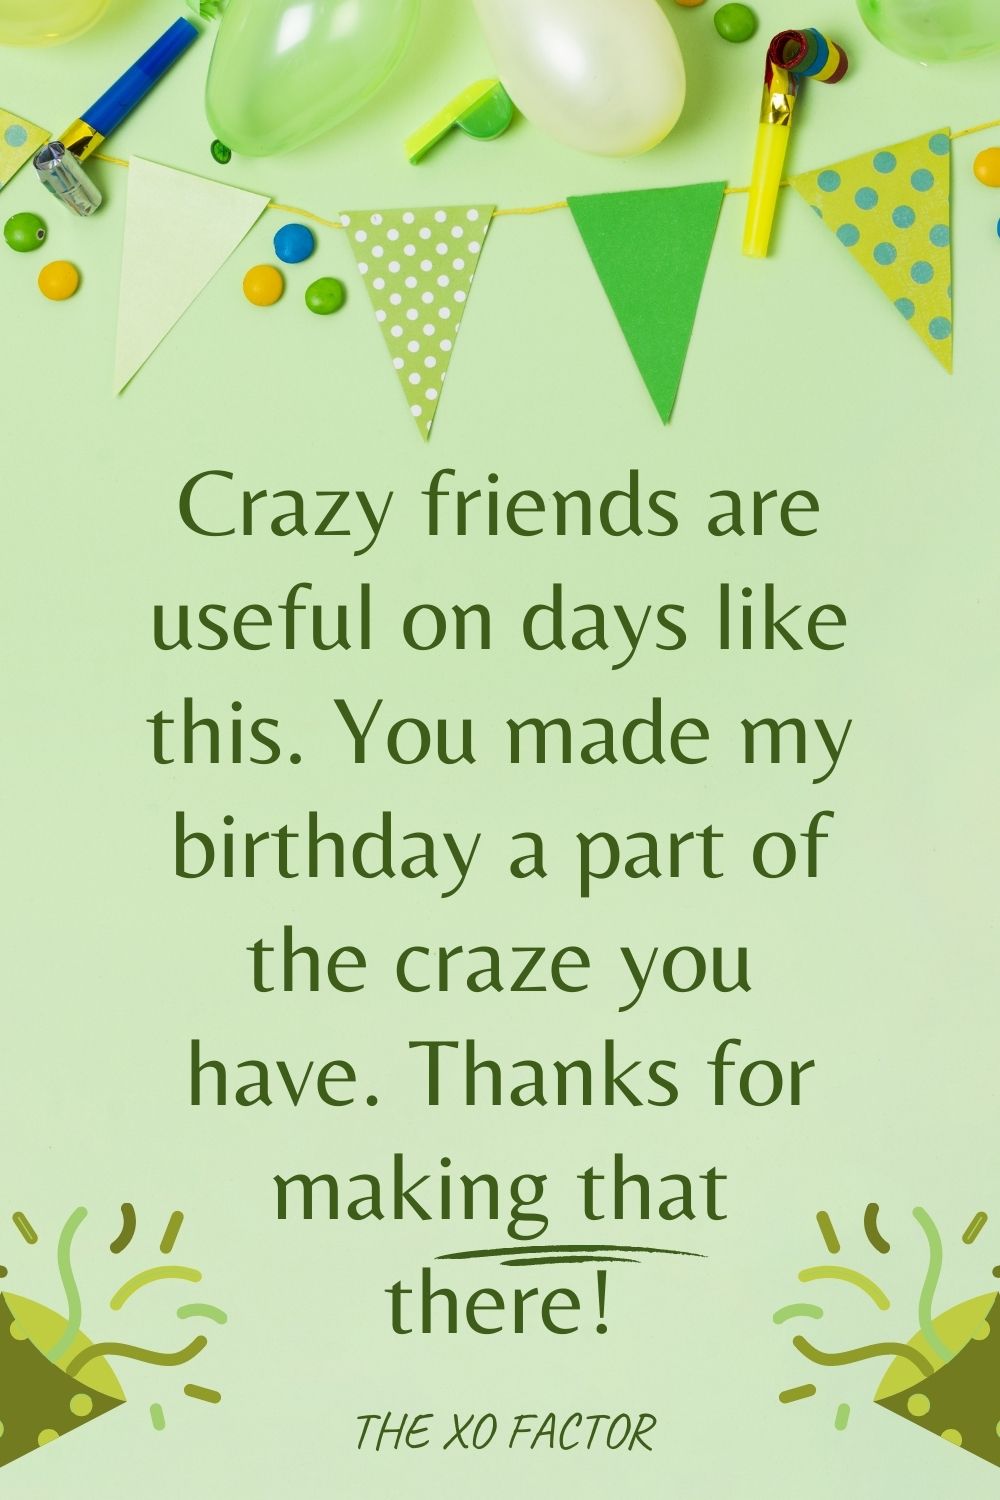 Crazy friends are useful on days like this. You made my birthday a part of the craze you have. Thanks for making that there!